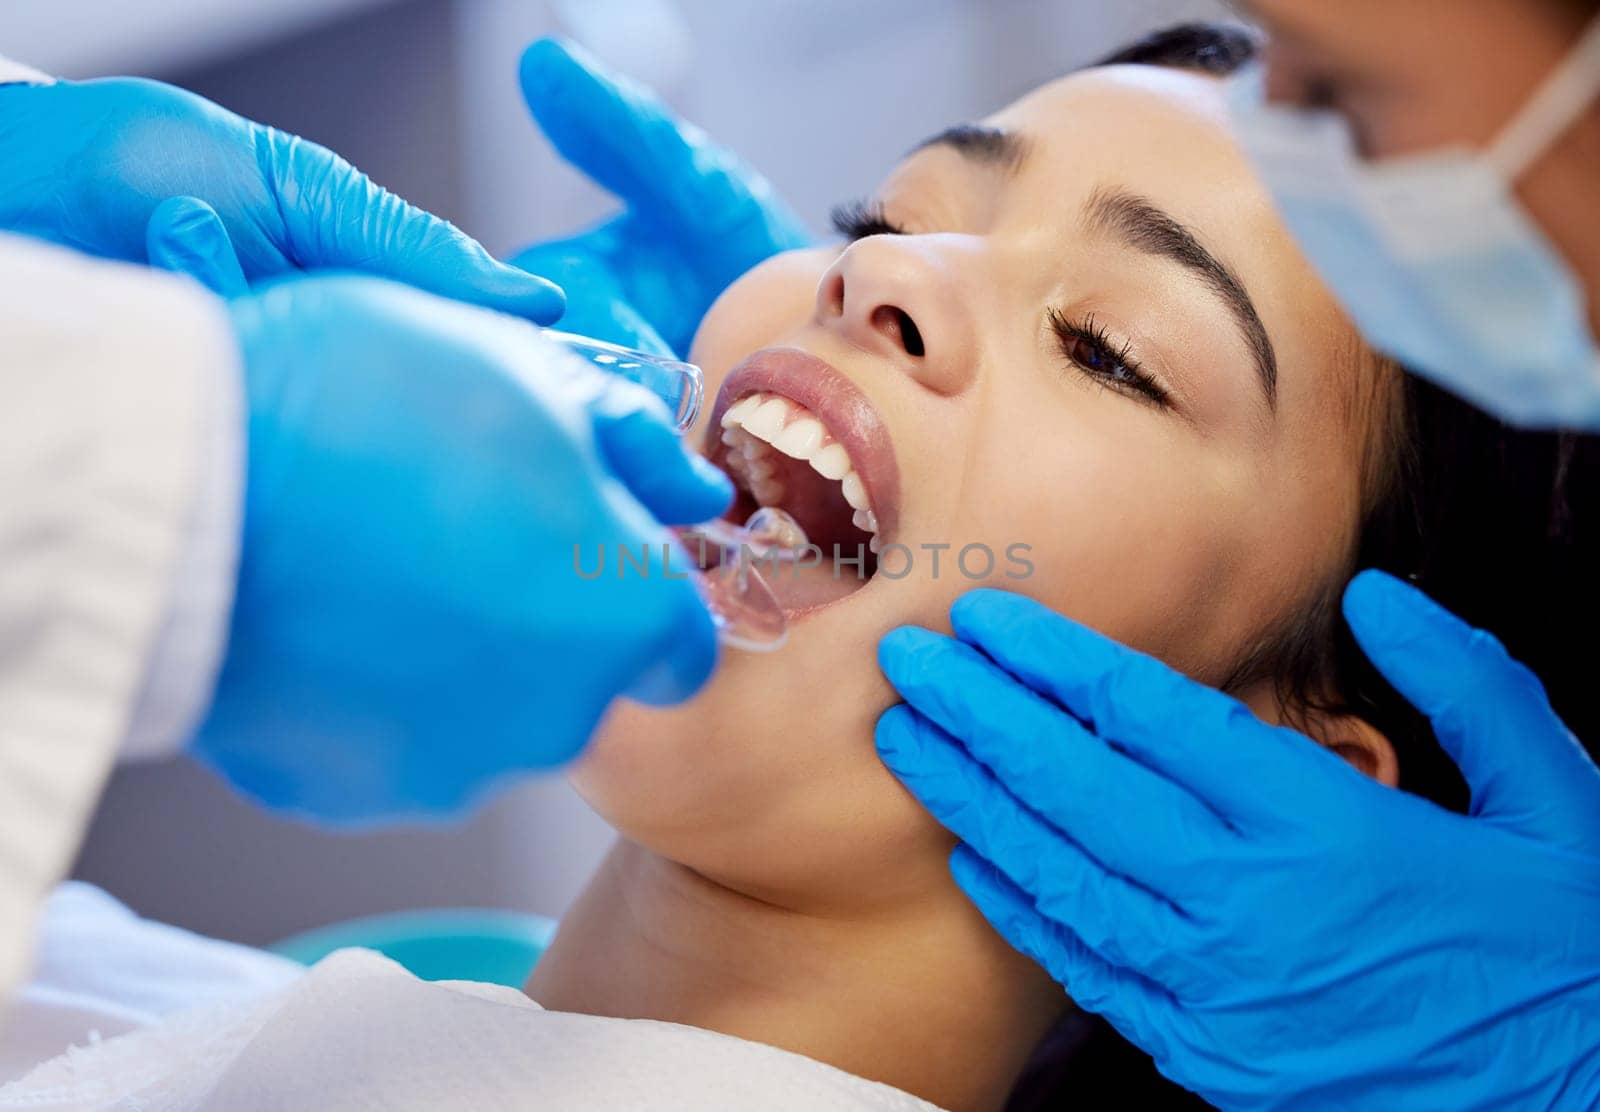 Those are some healthy looking teeth. a young woman having a dental procedure performed on her